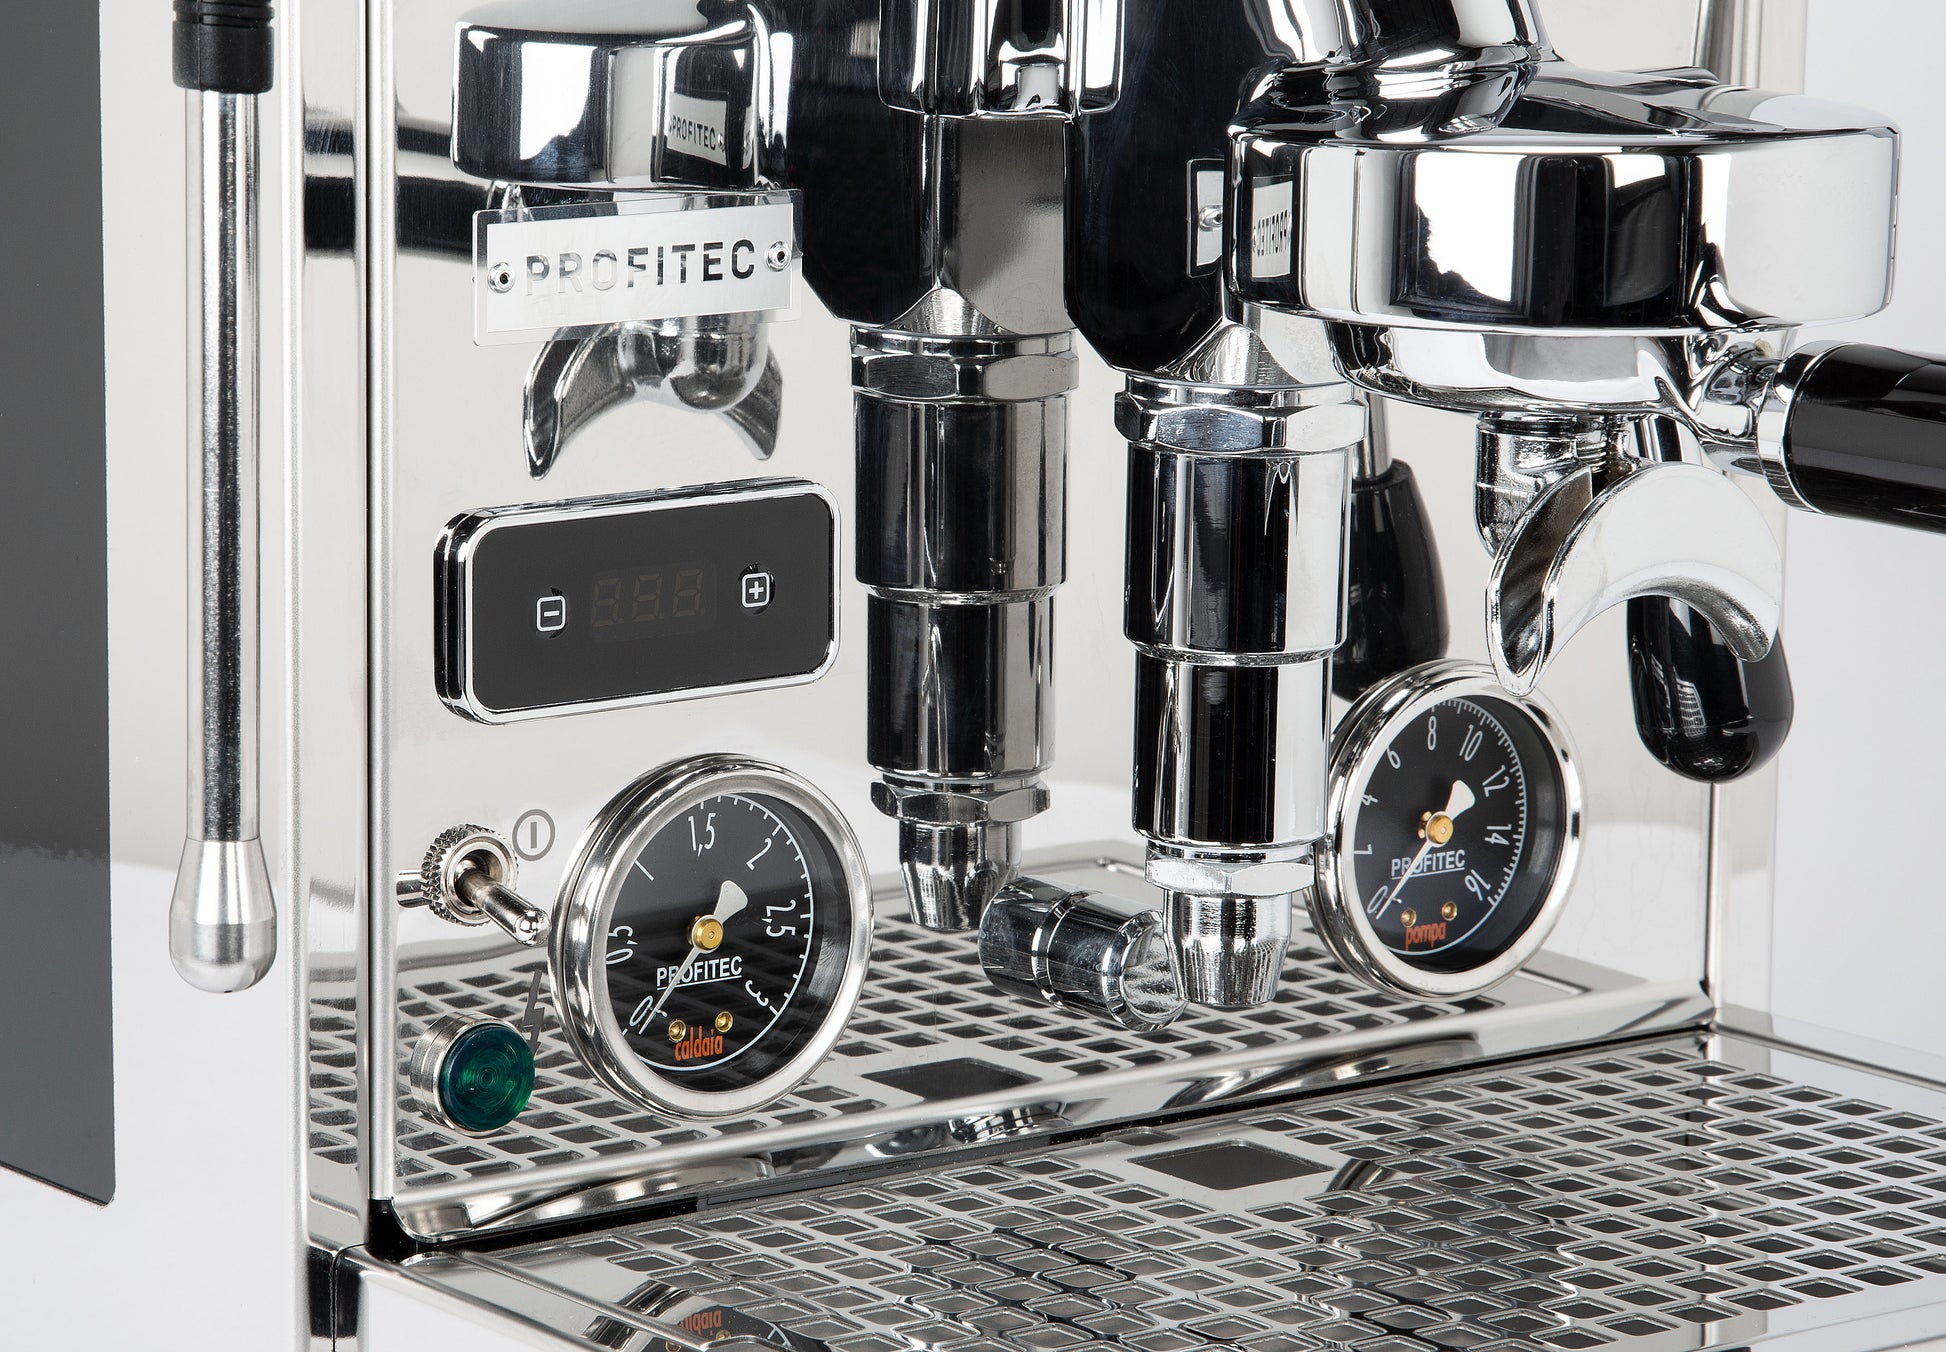 Looking for advice on a used commercial grinder+espresso machine combo : r/ Coffee